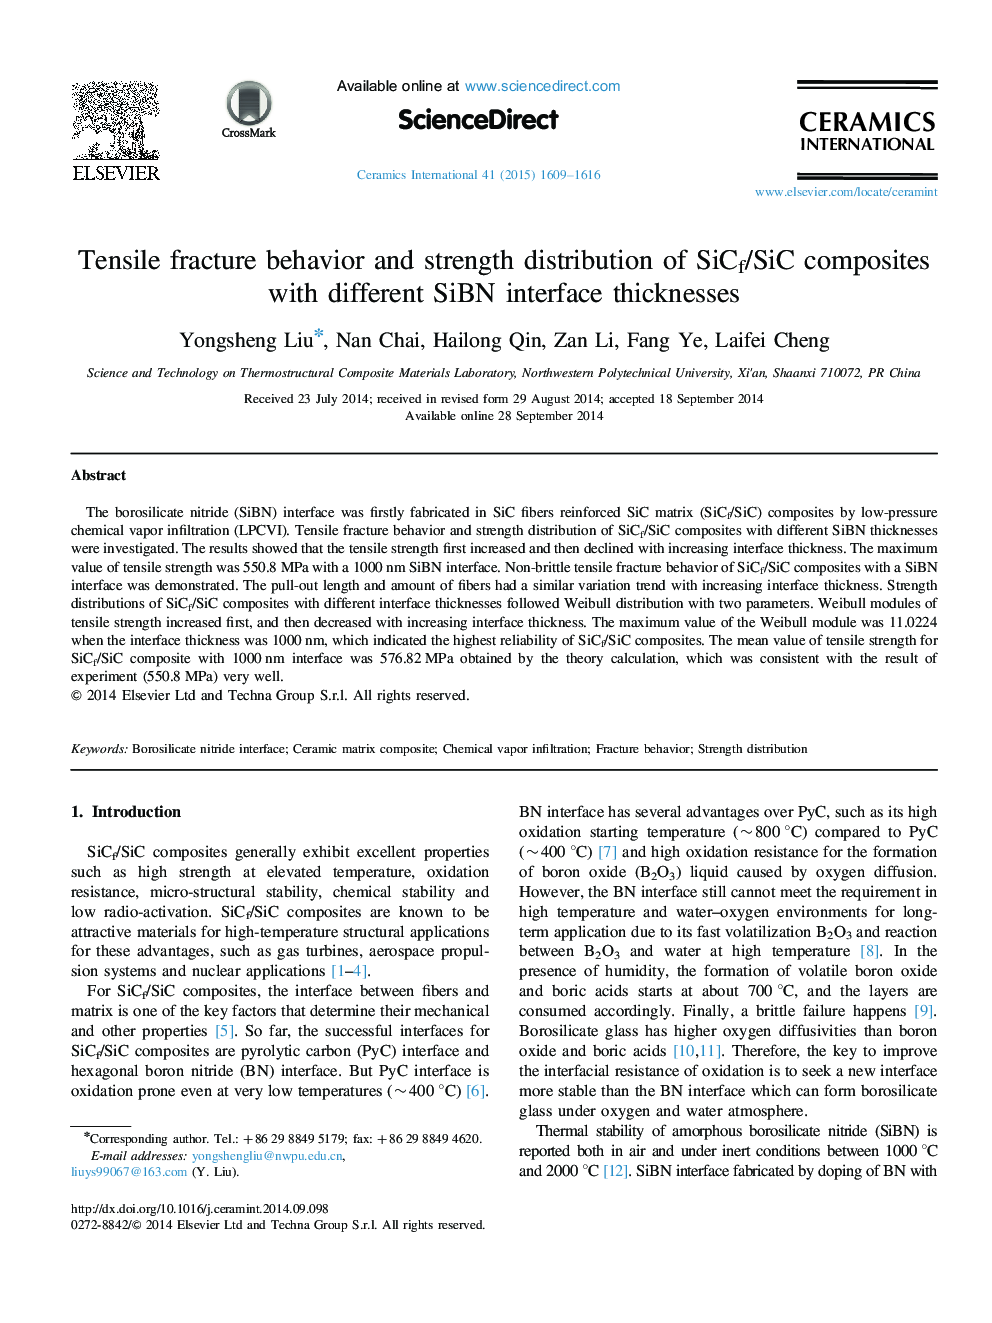 Tensile fracture behavior and strength distribution of SiCf/SiC composites with different SiBN interface thicknesses